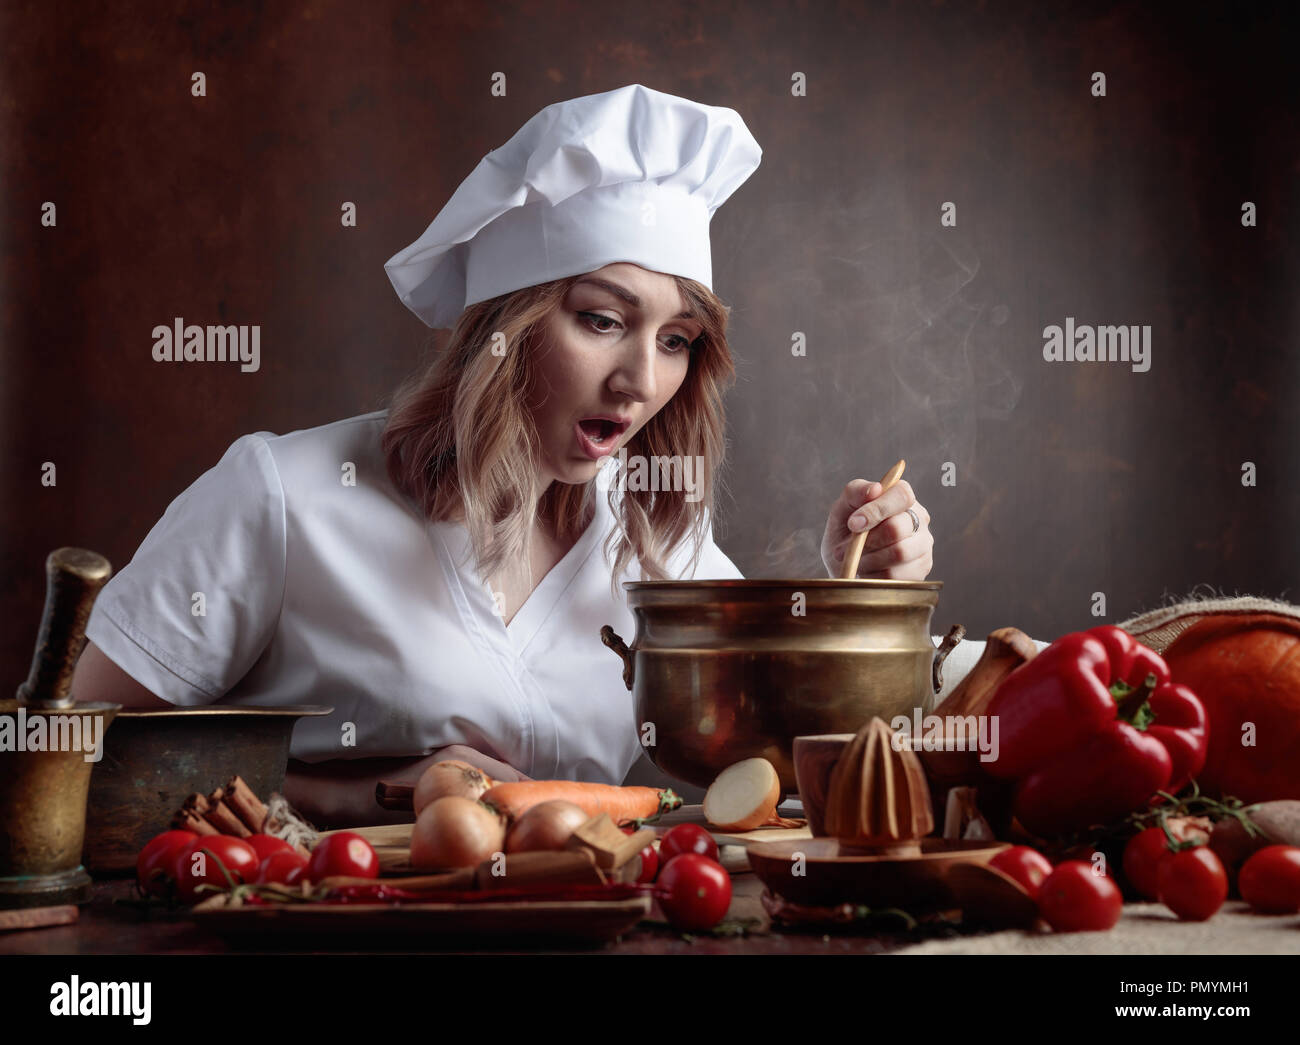 https://c8.alamy.com/comp/PMYMH1/young-beautiful-girl-in-a-chef-uniform-with-old-brass-pan-and-wooden-spoon-tasting-food-on-a-table-various-kitchenware-and-vegetables-PMYMH1.jpg